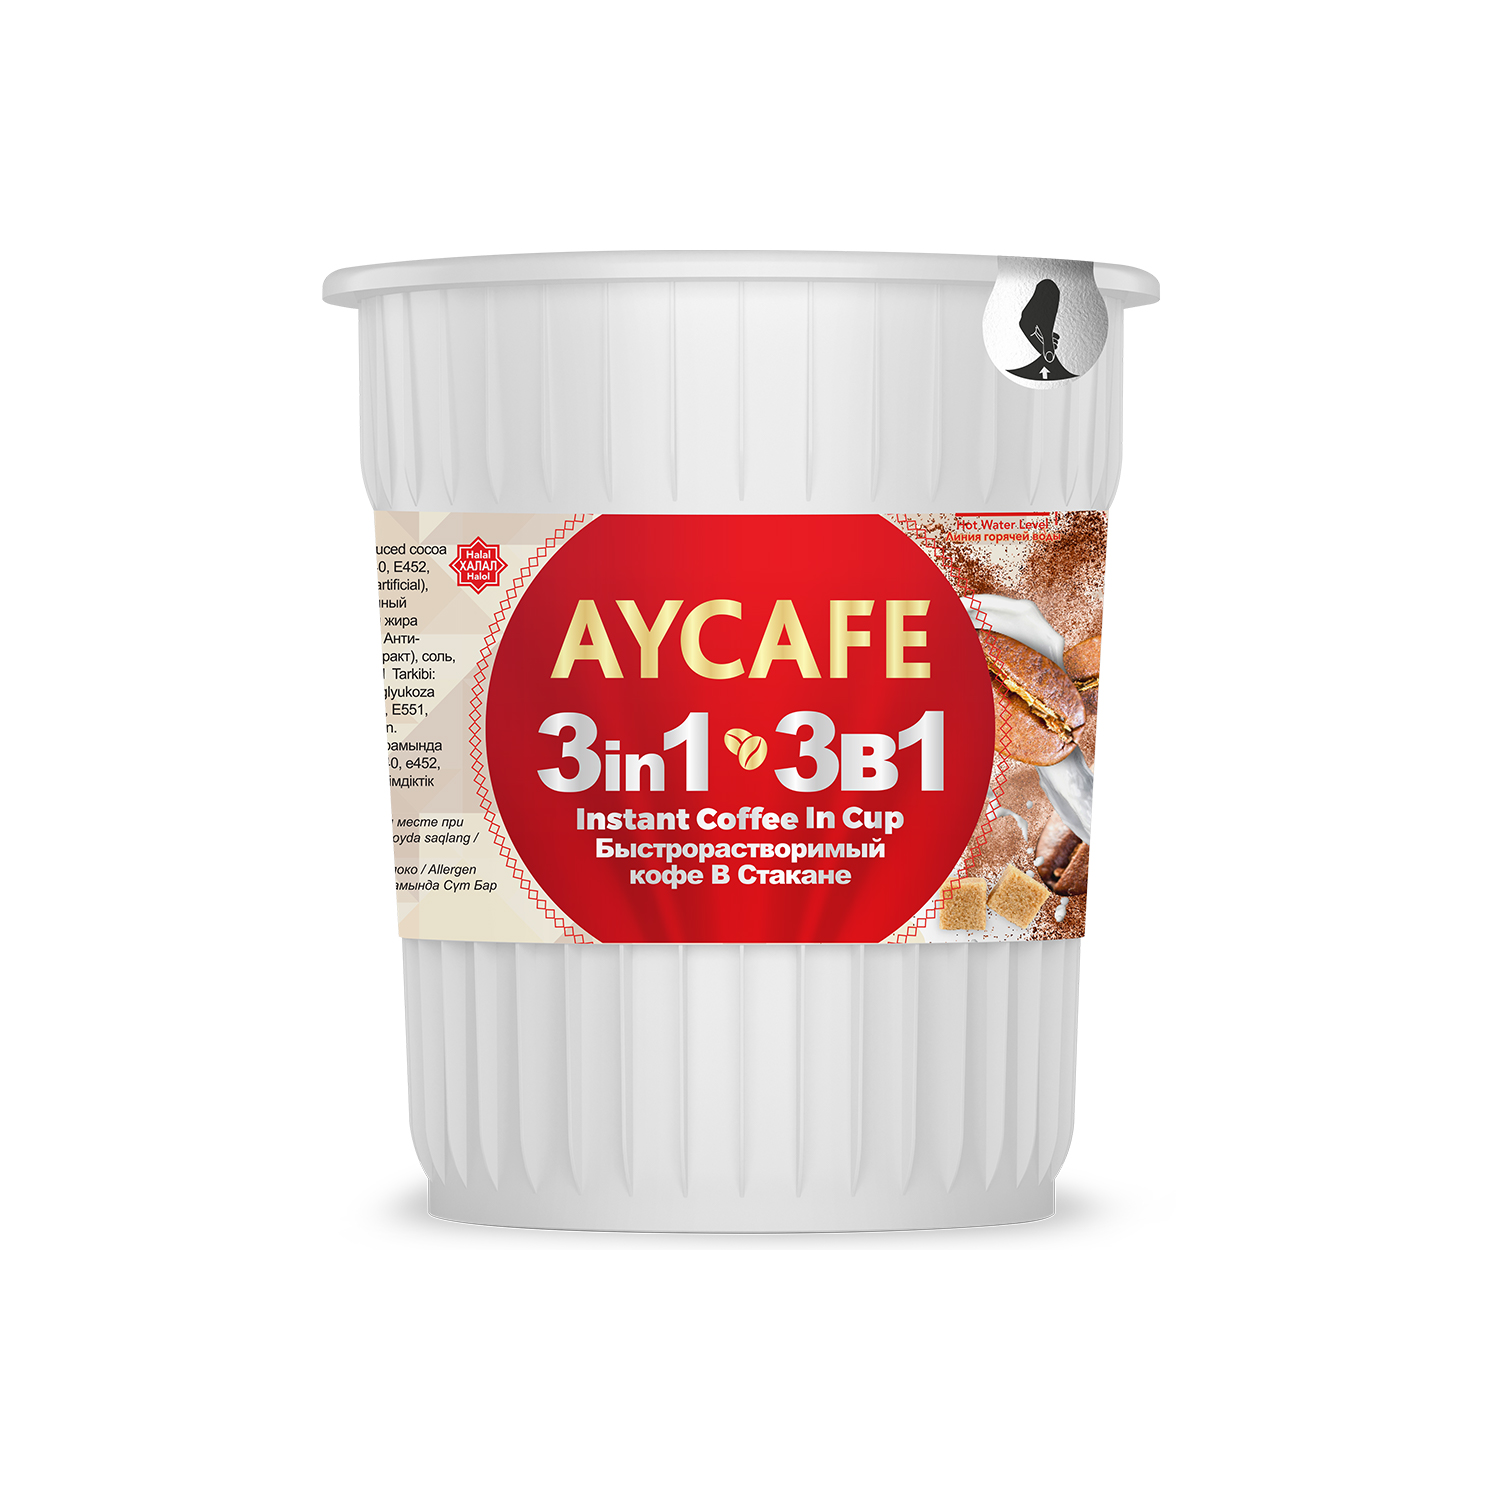 Aycafe 3in1 Instant Coffee In Cup